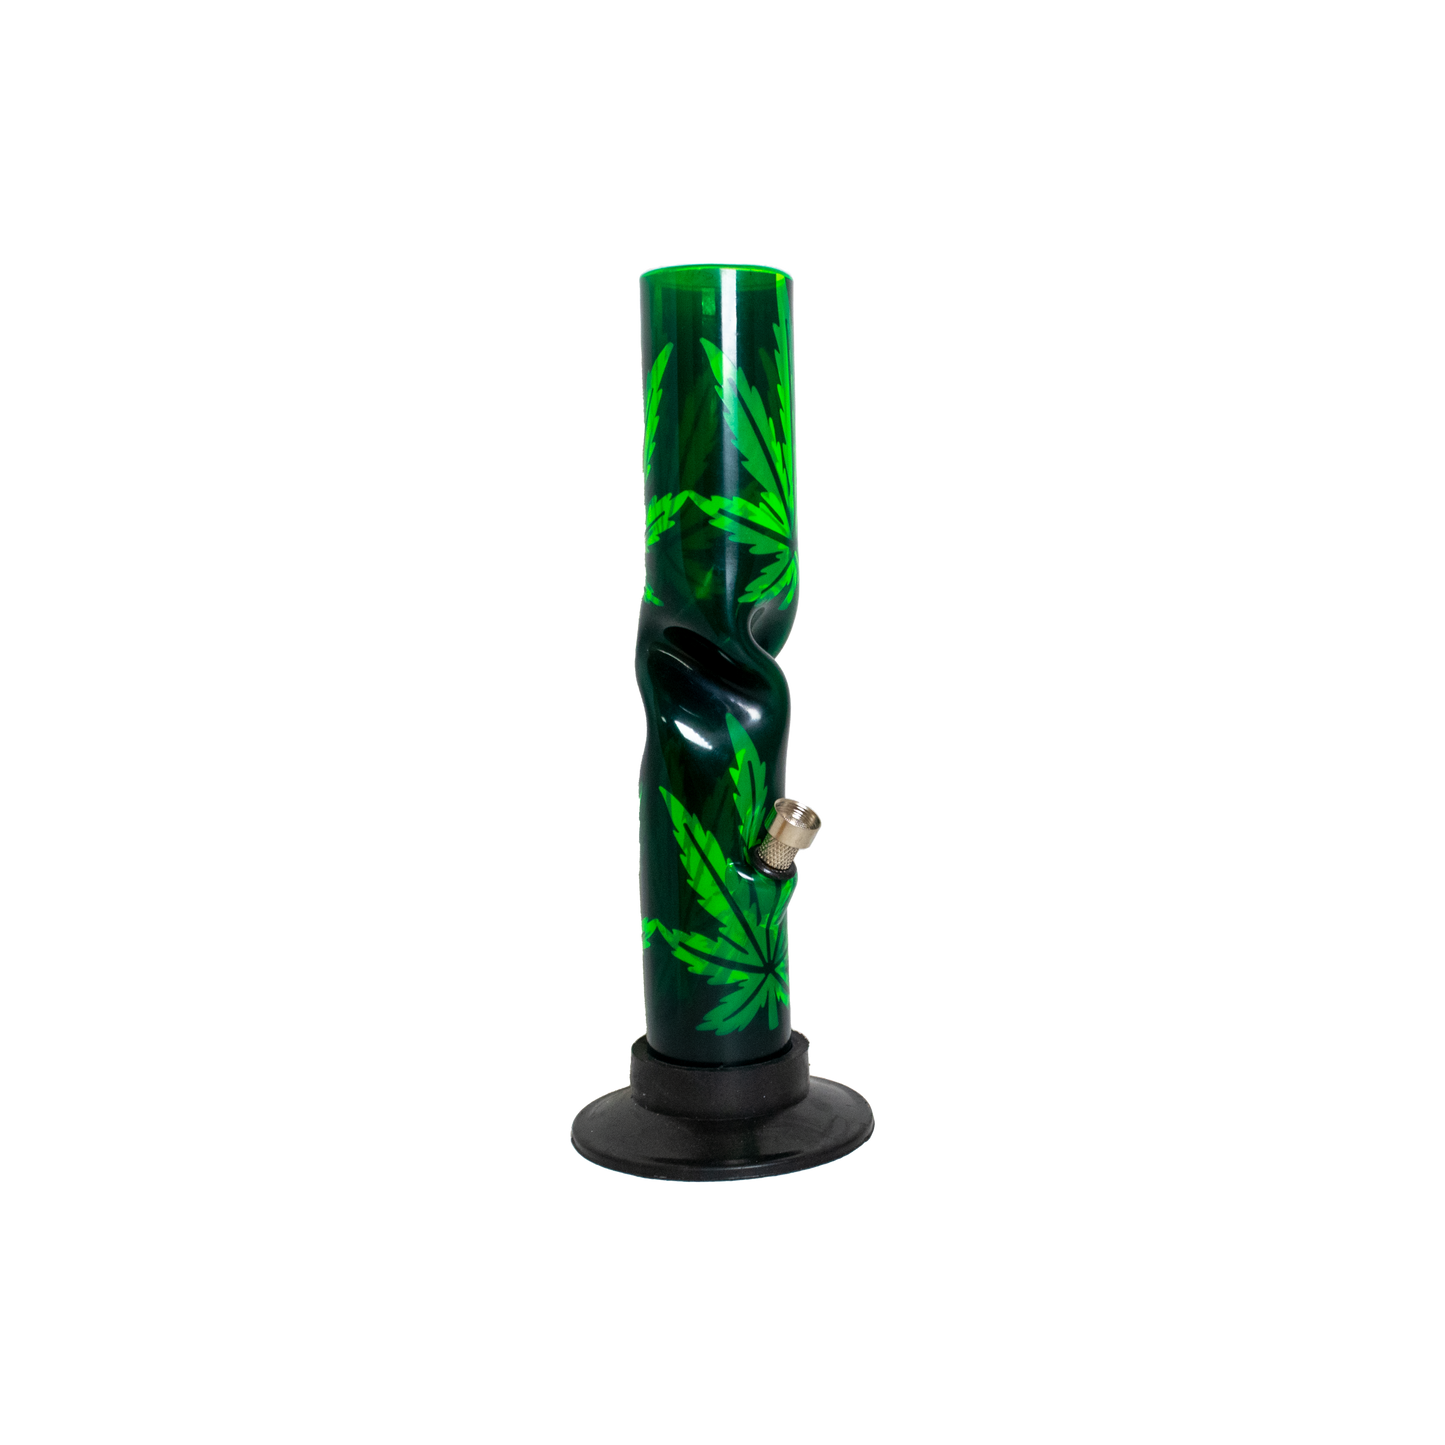 Acrylic Waterpipe - 30cm, Straight with Ice Twist, Leaf